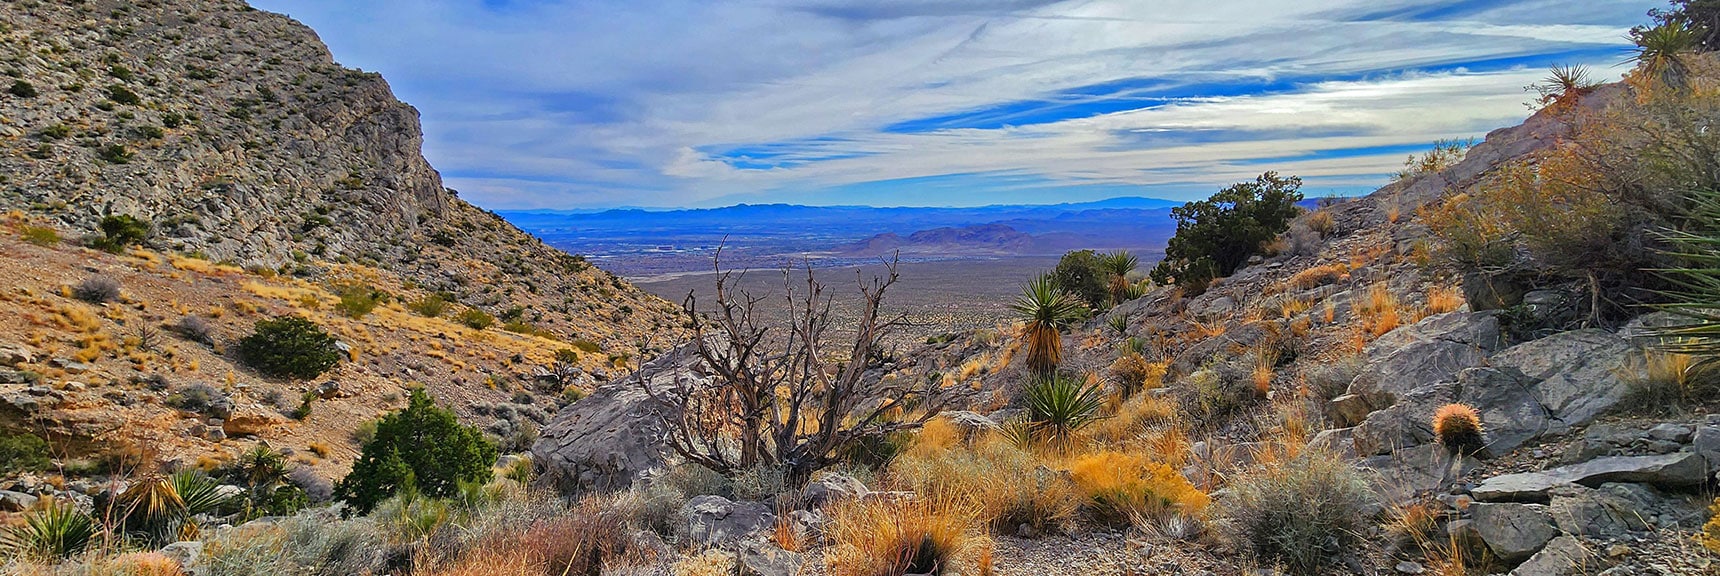 View Out Gully Opening. | Damsel Peak Southeastern Slope | Calico & Brownstone Basins, Nevada